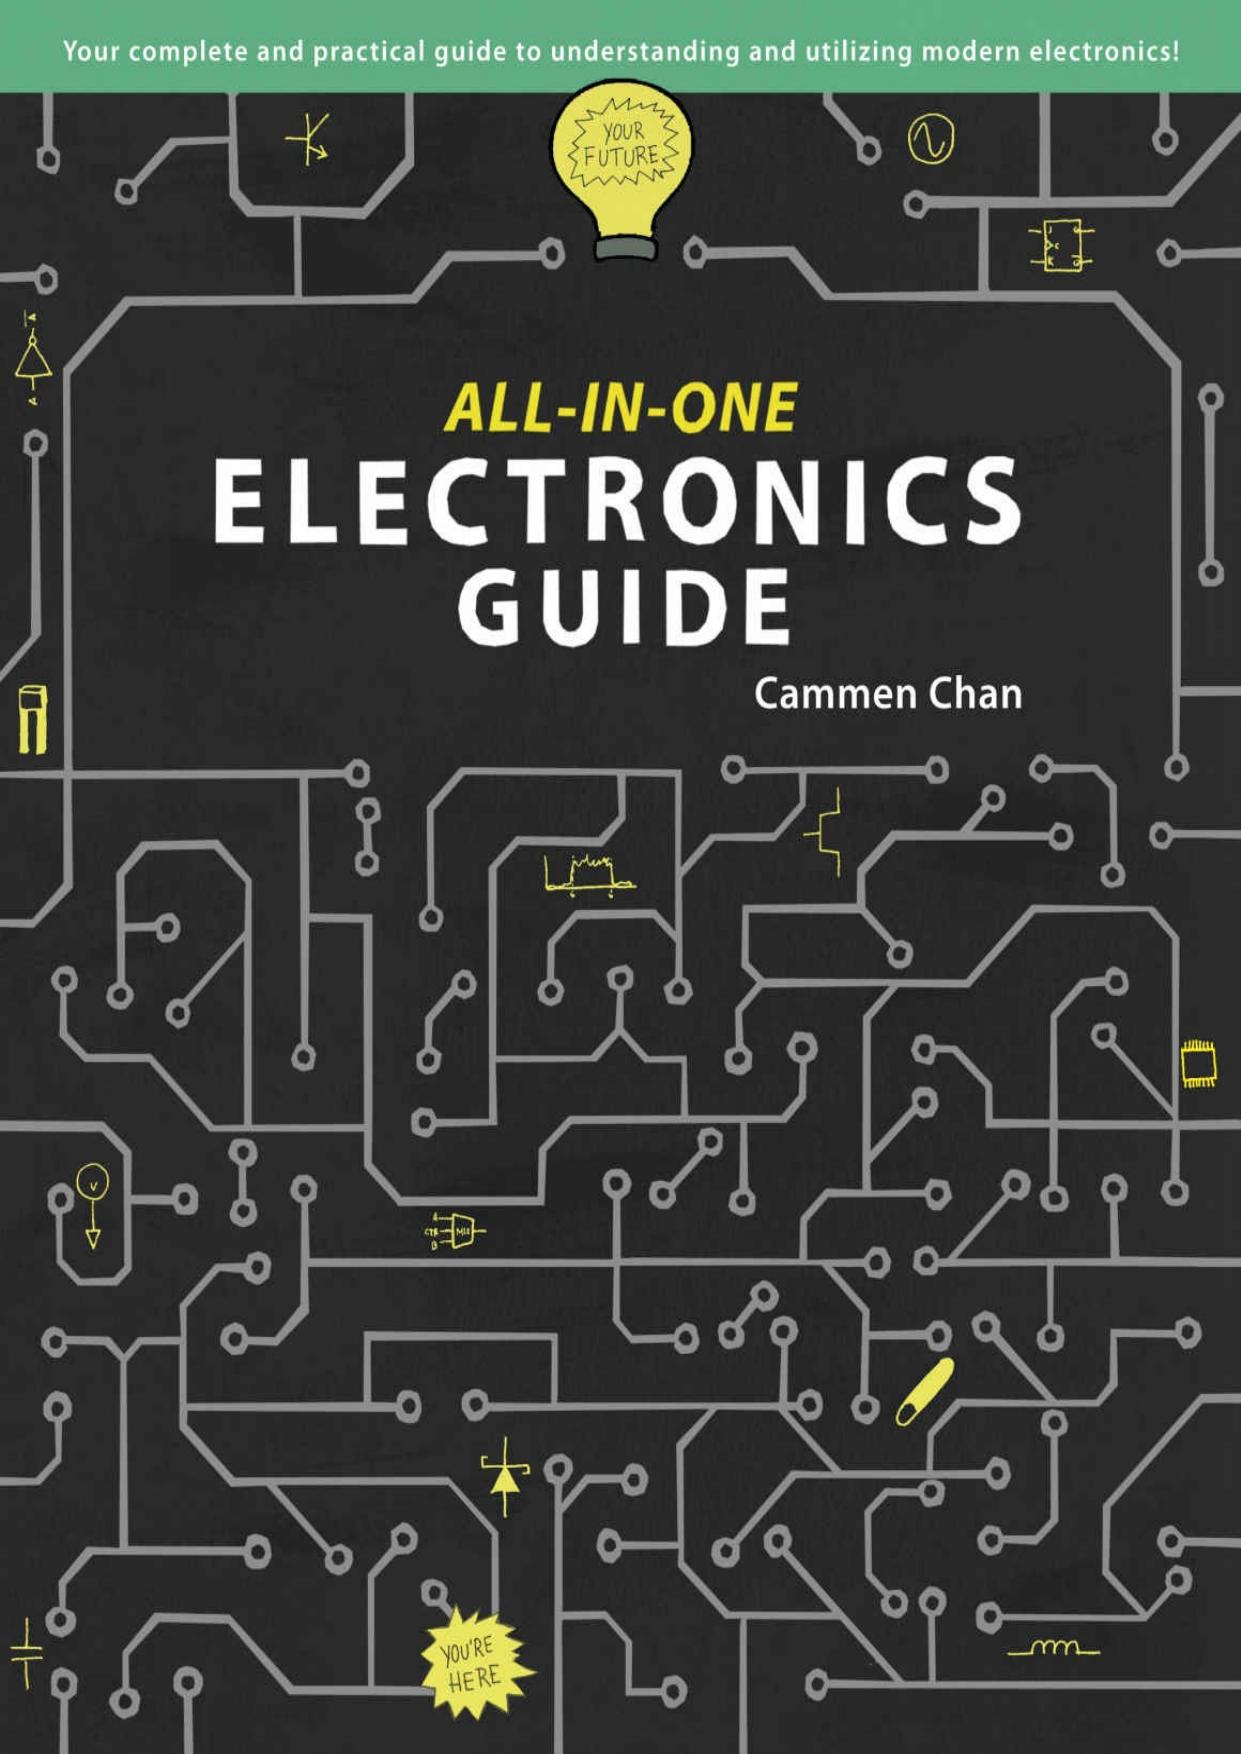 All-in-One Electronics Guide: Your complete ultimate guide to understanding and utilizing electronics!